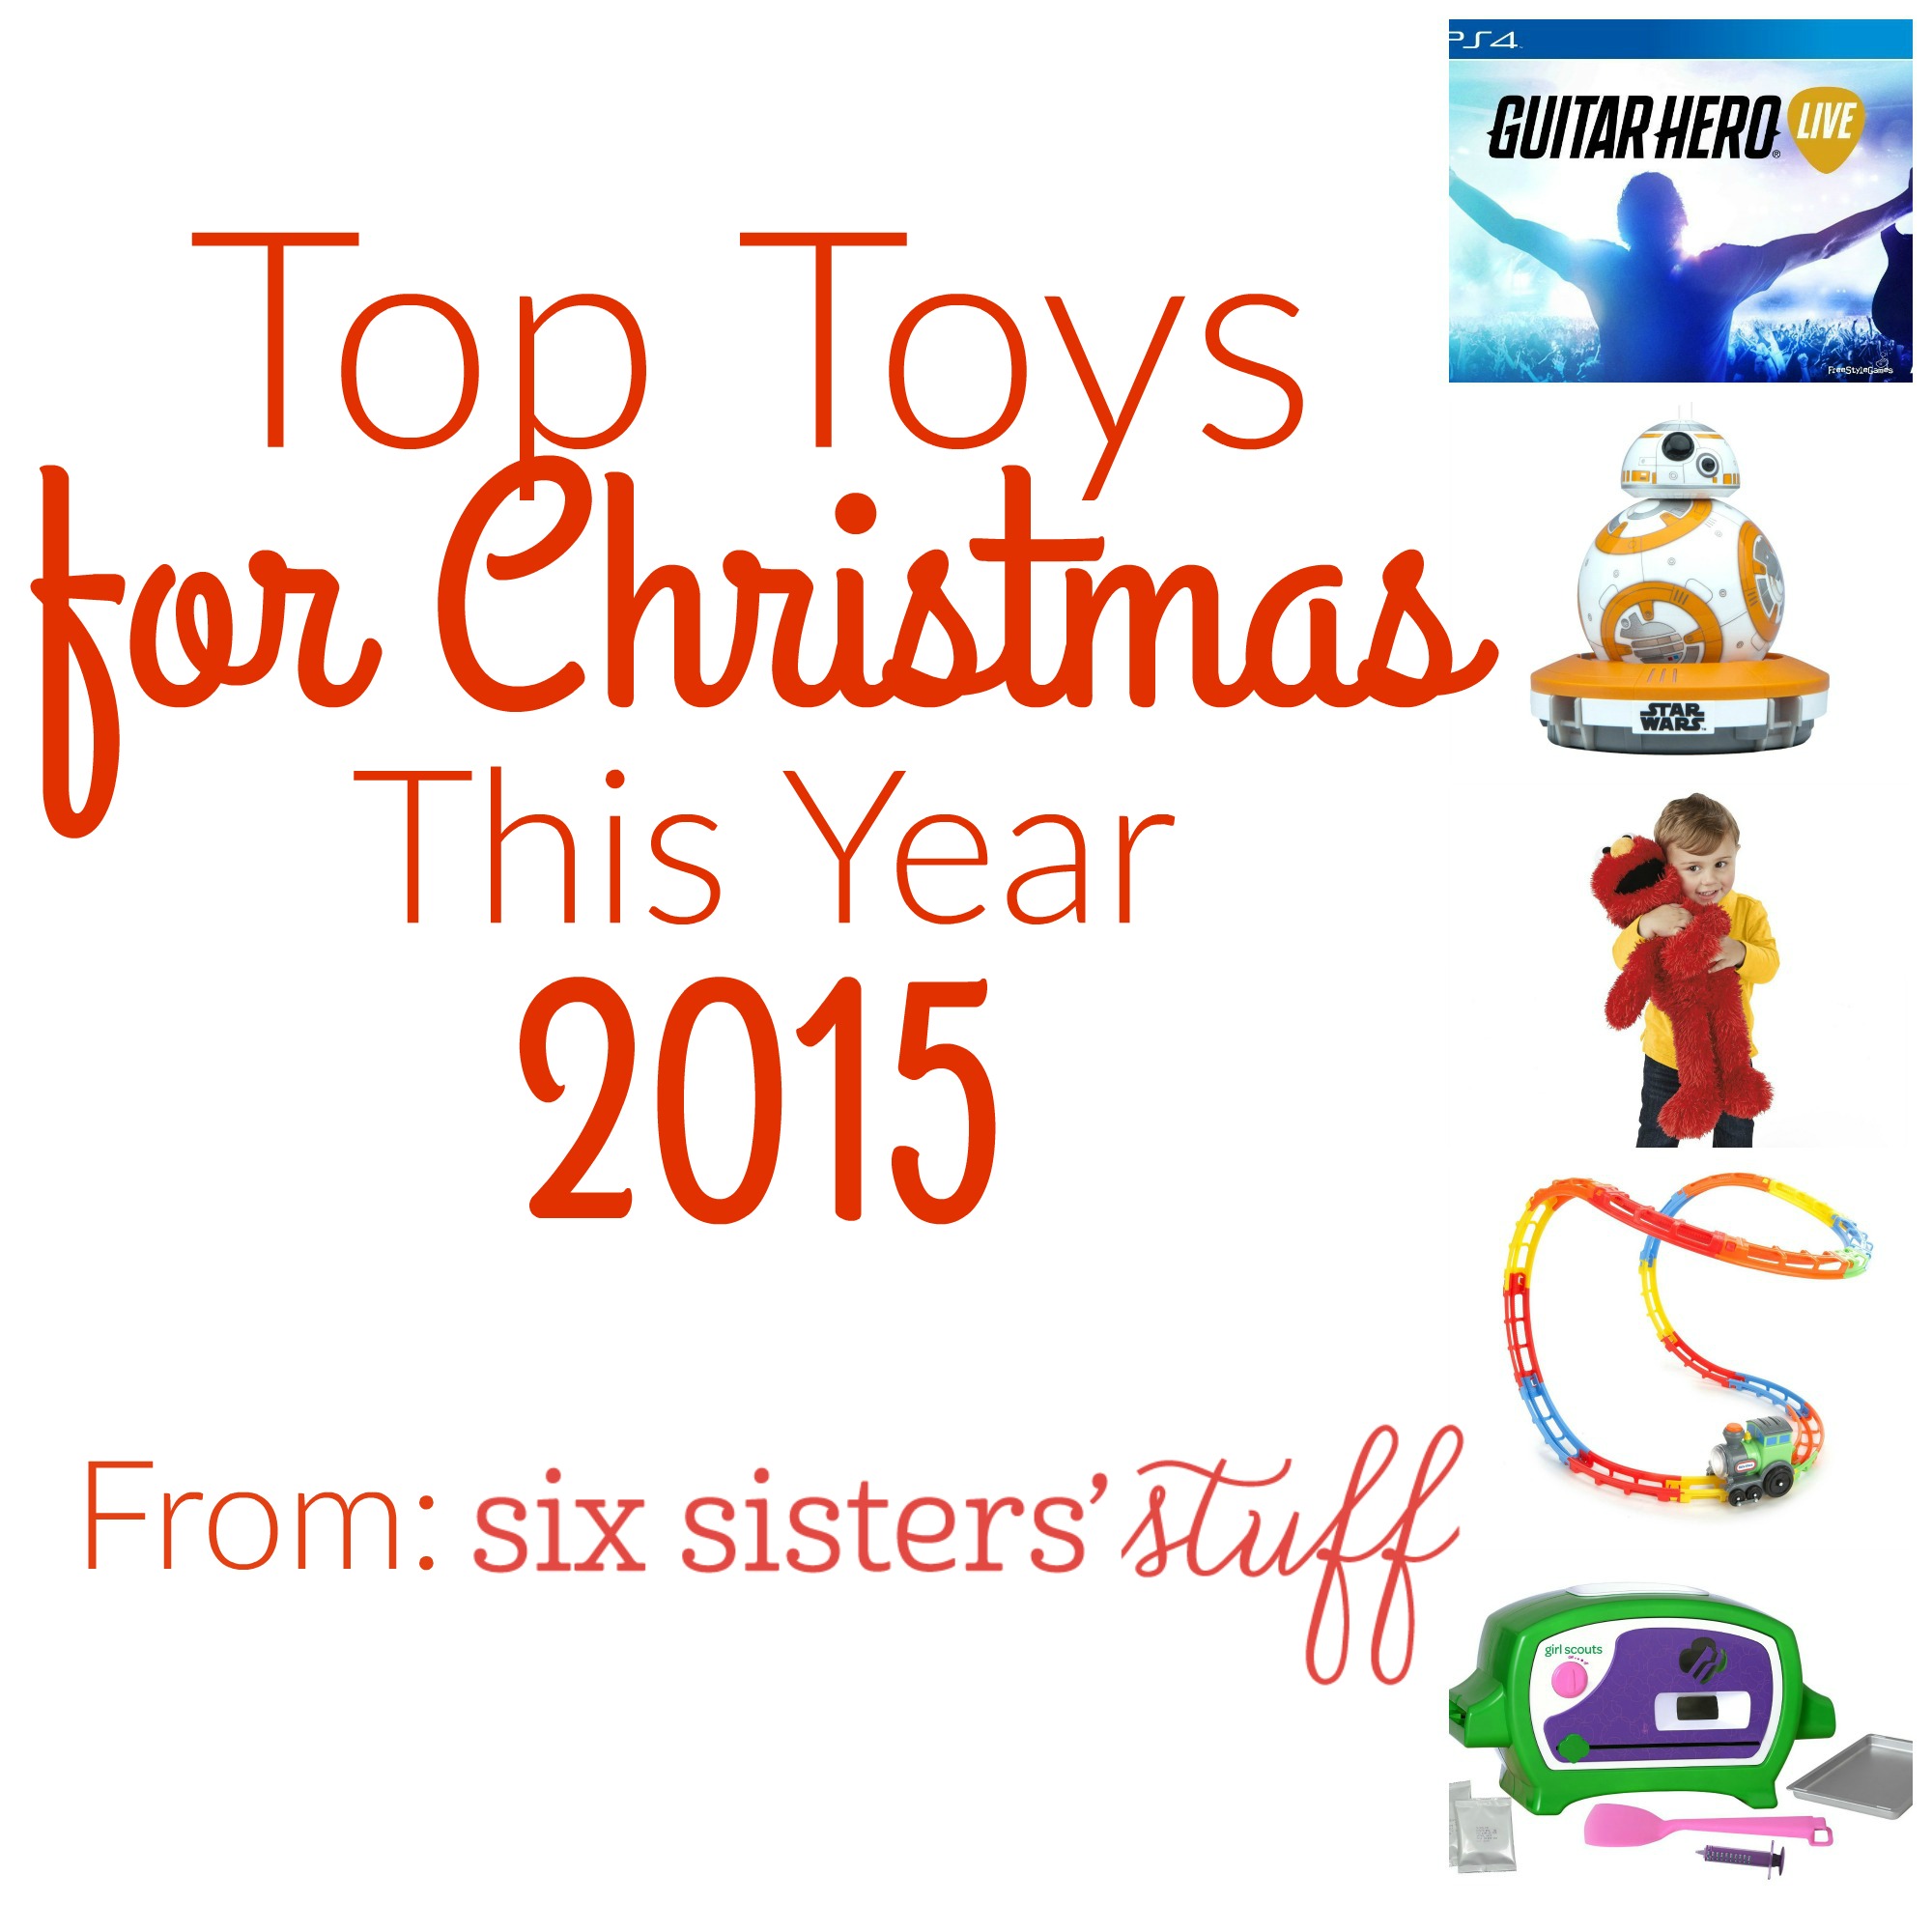 The Top Toys for Christmas 2015